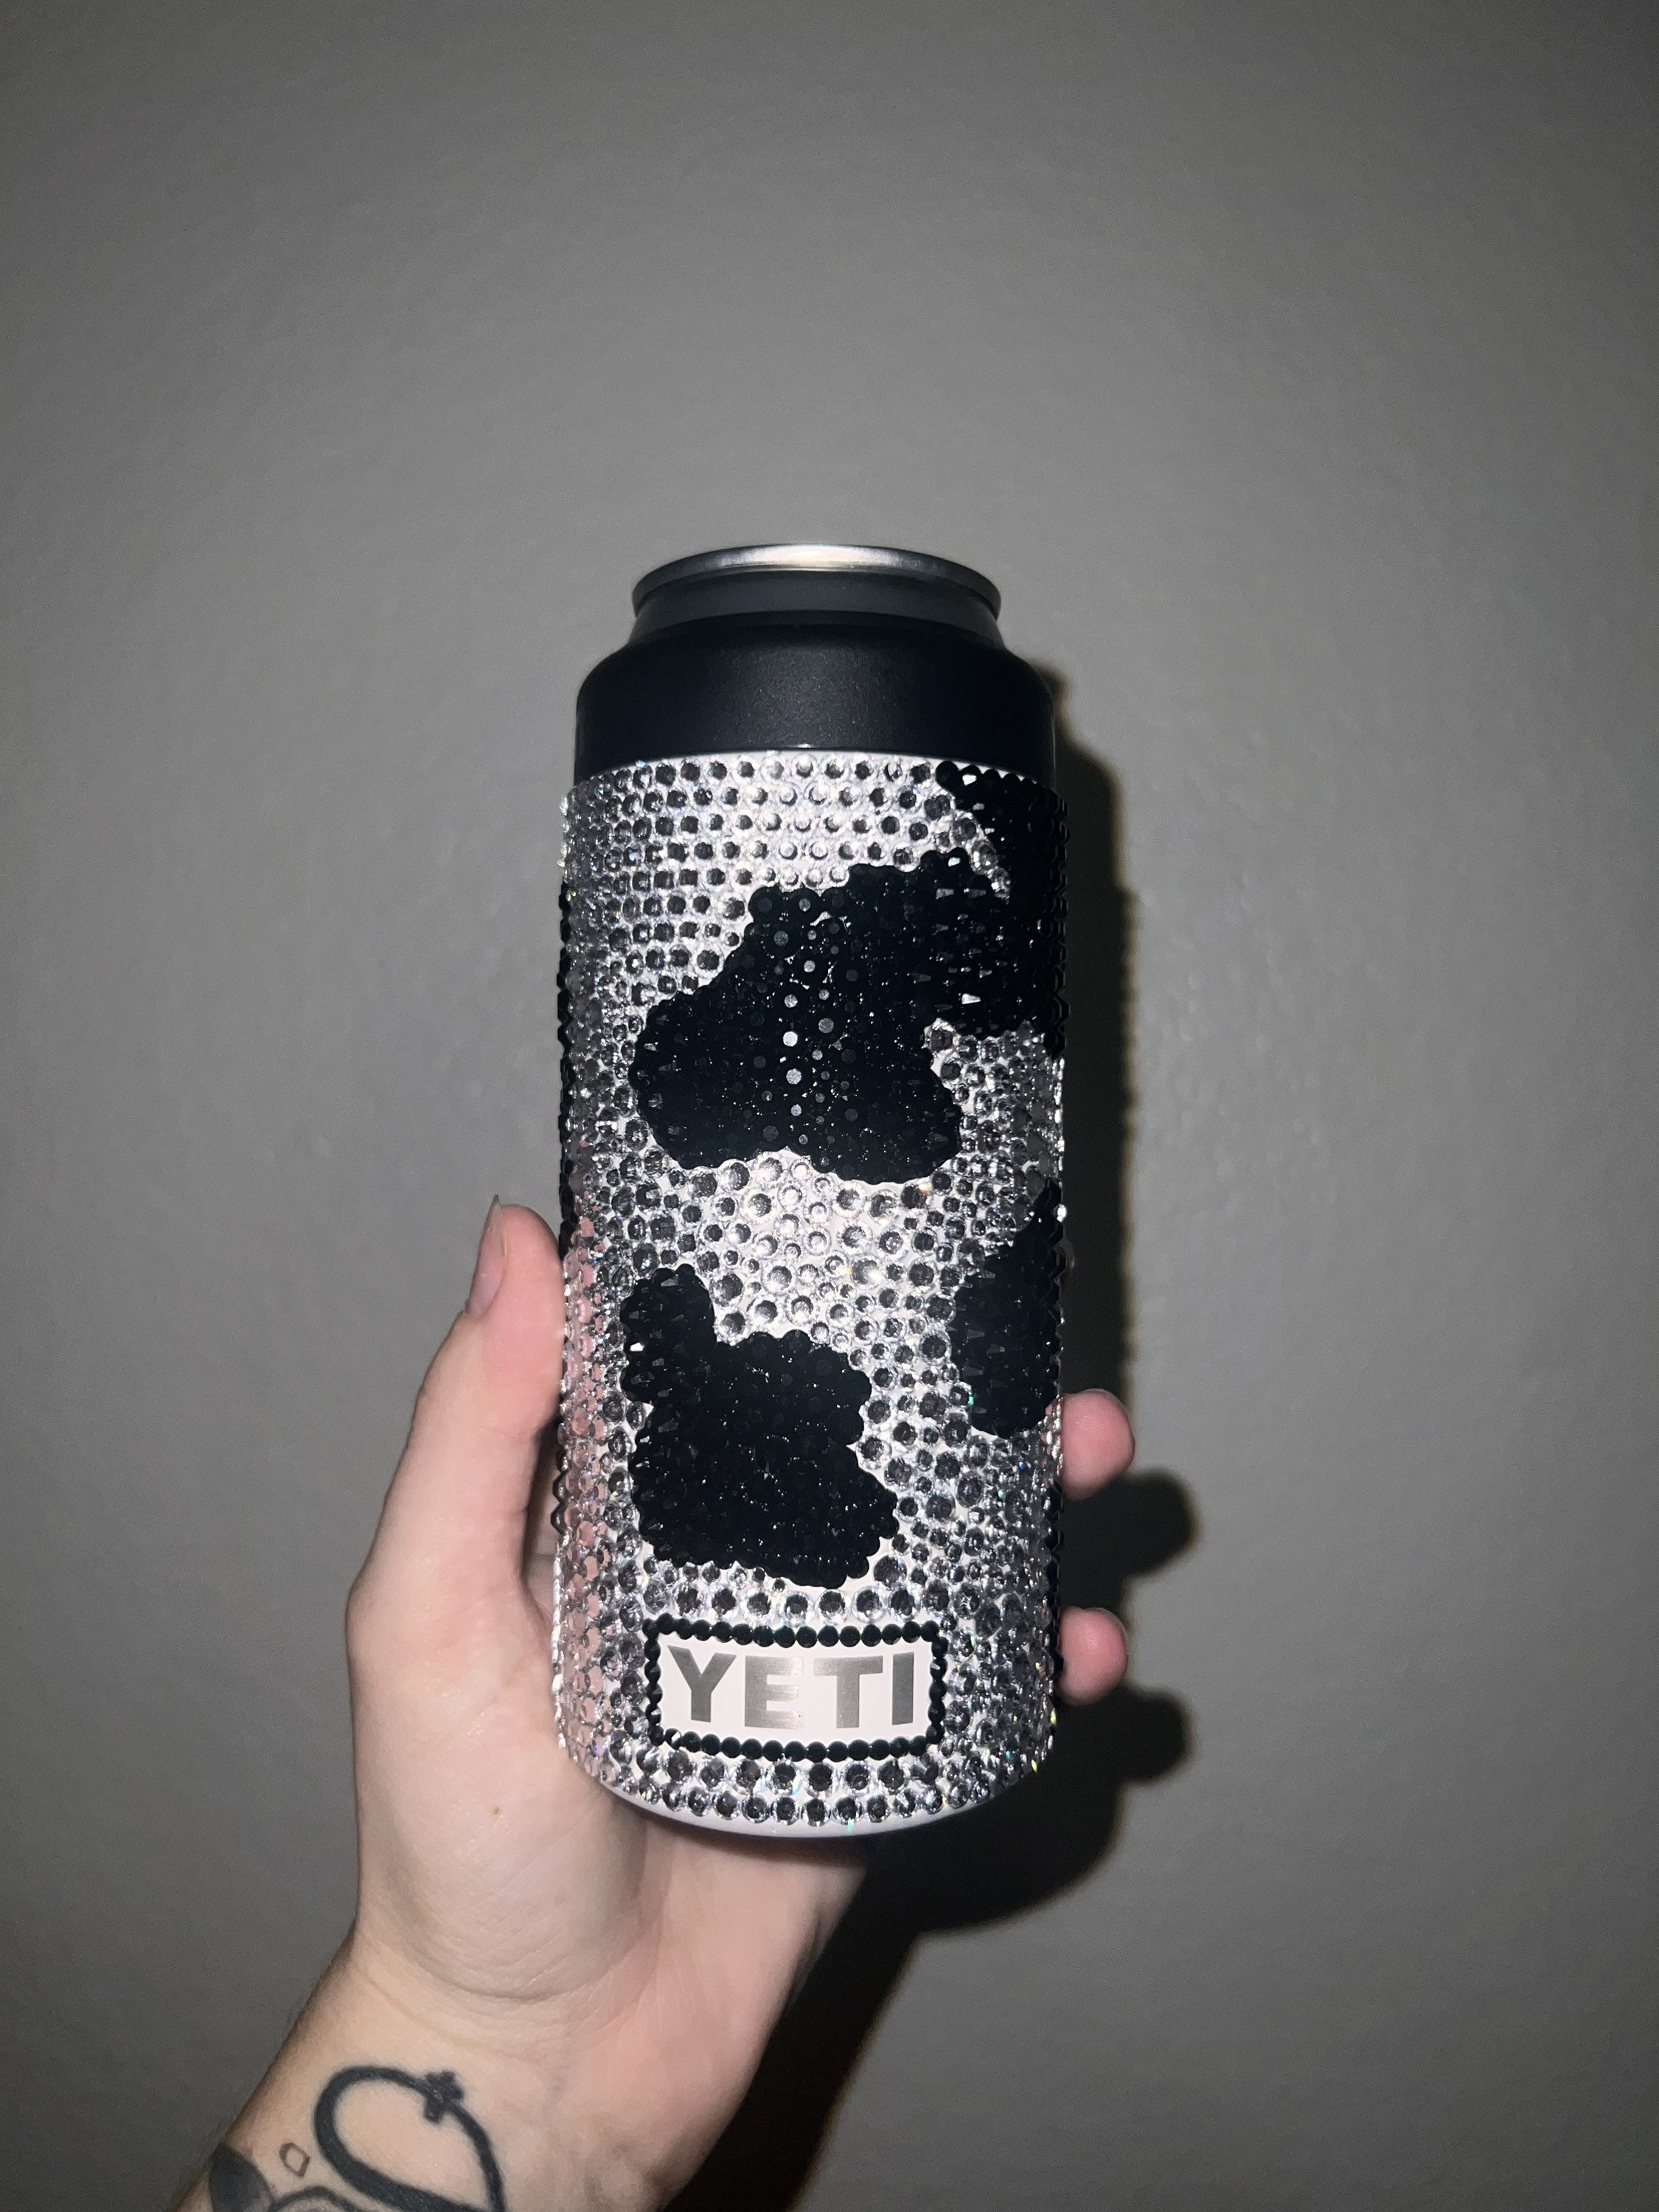 First bling project was a Simple Modern can koozie. Definitely